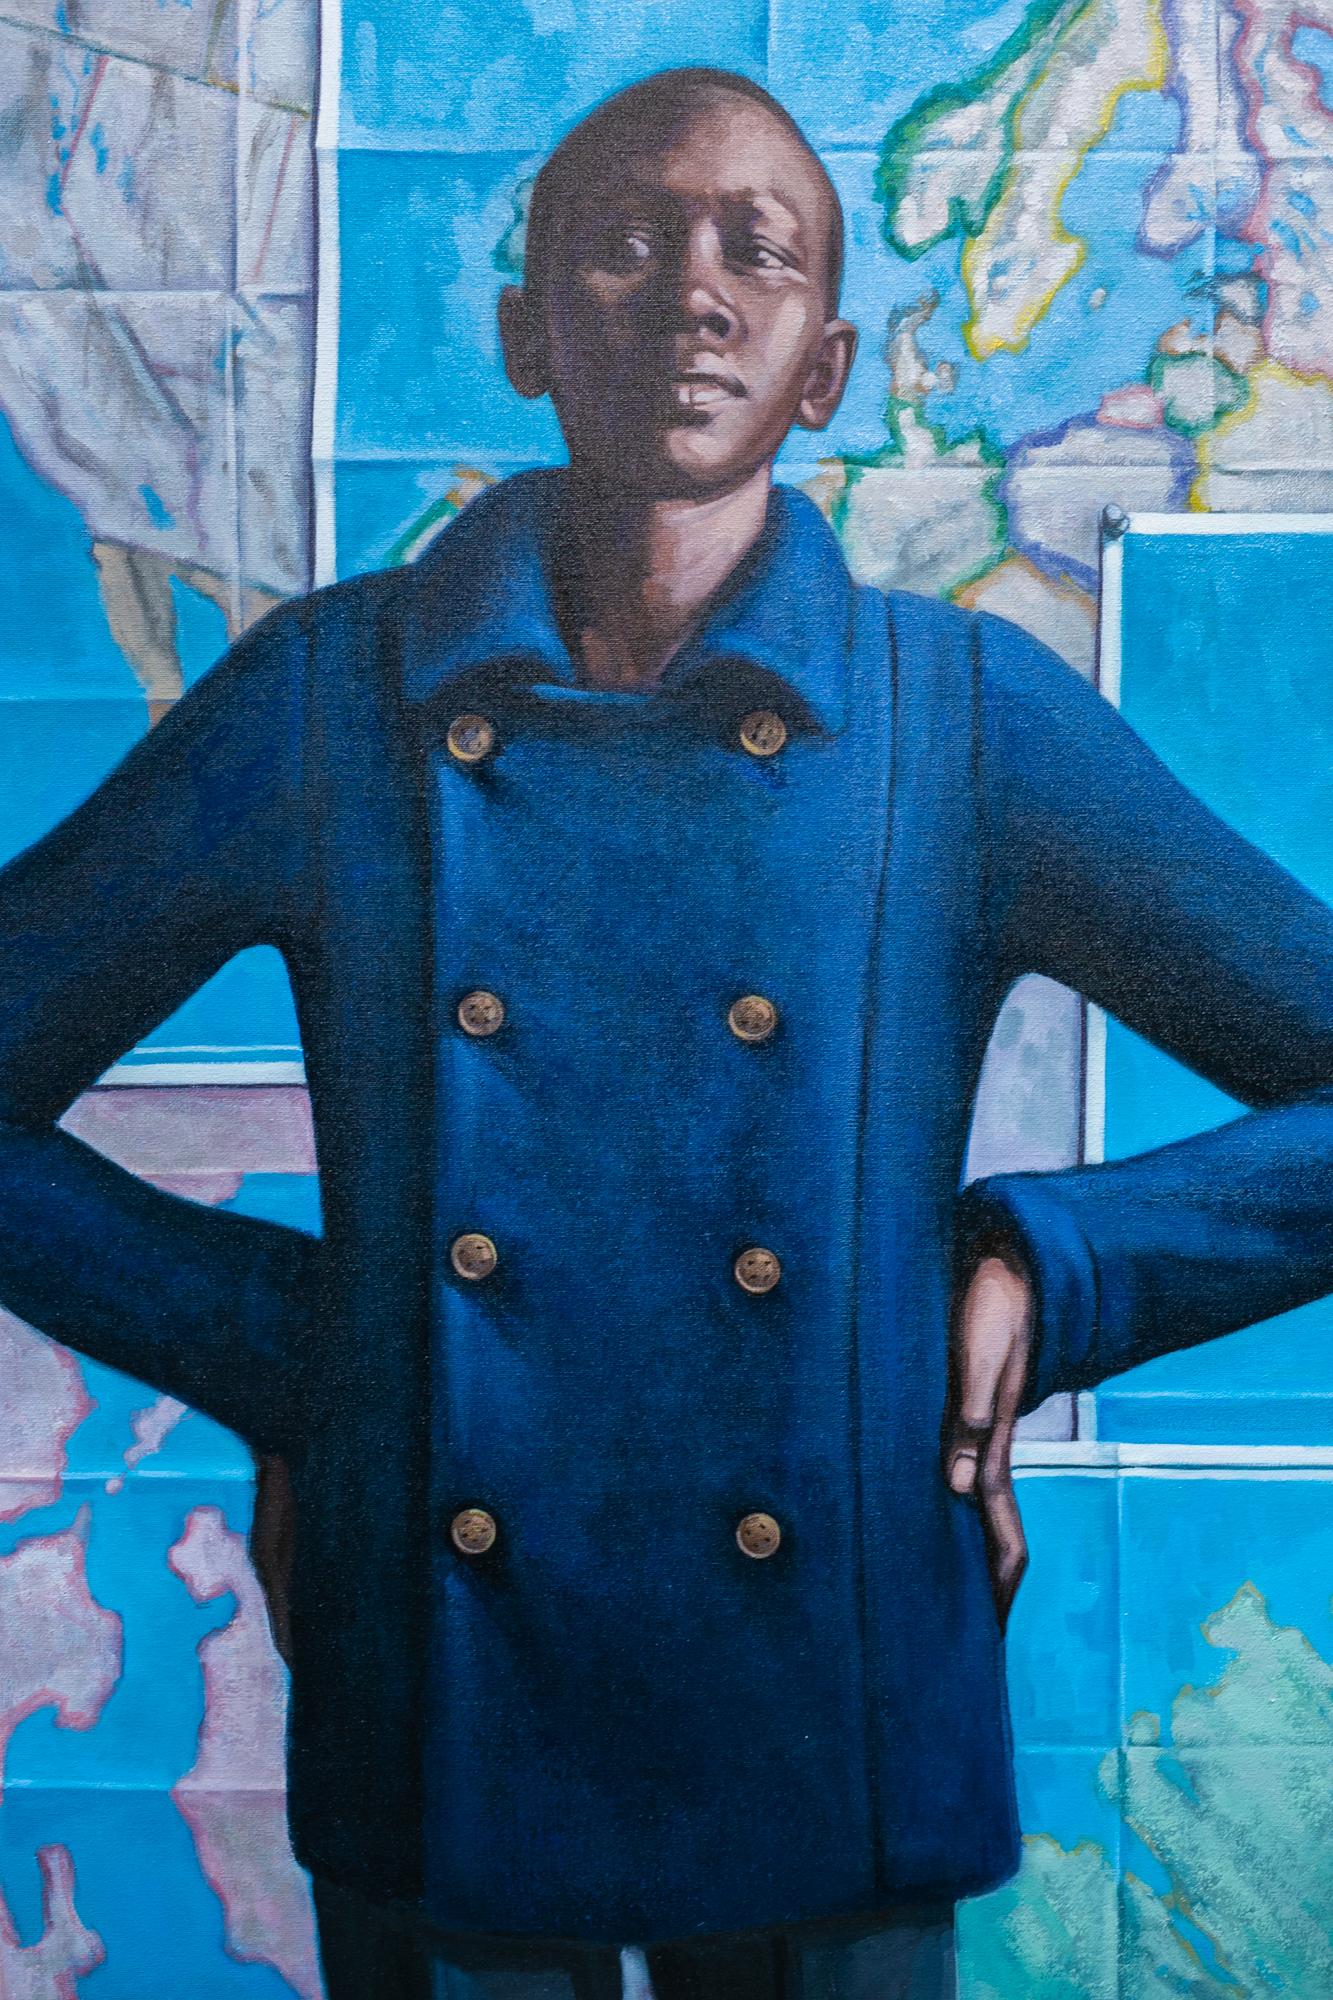 This figurative painting titled 